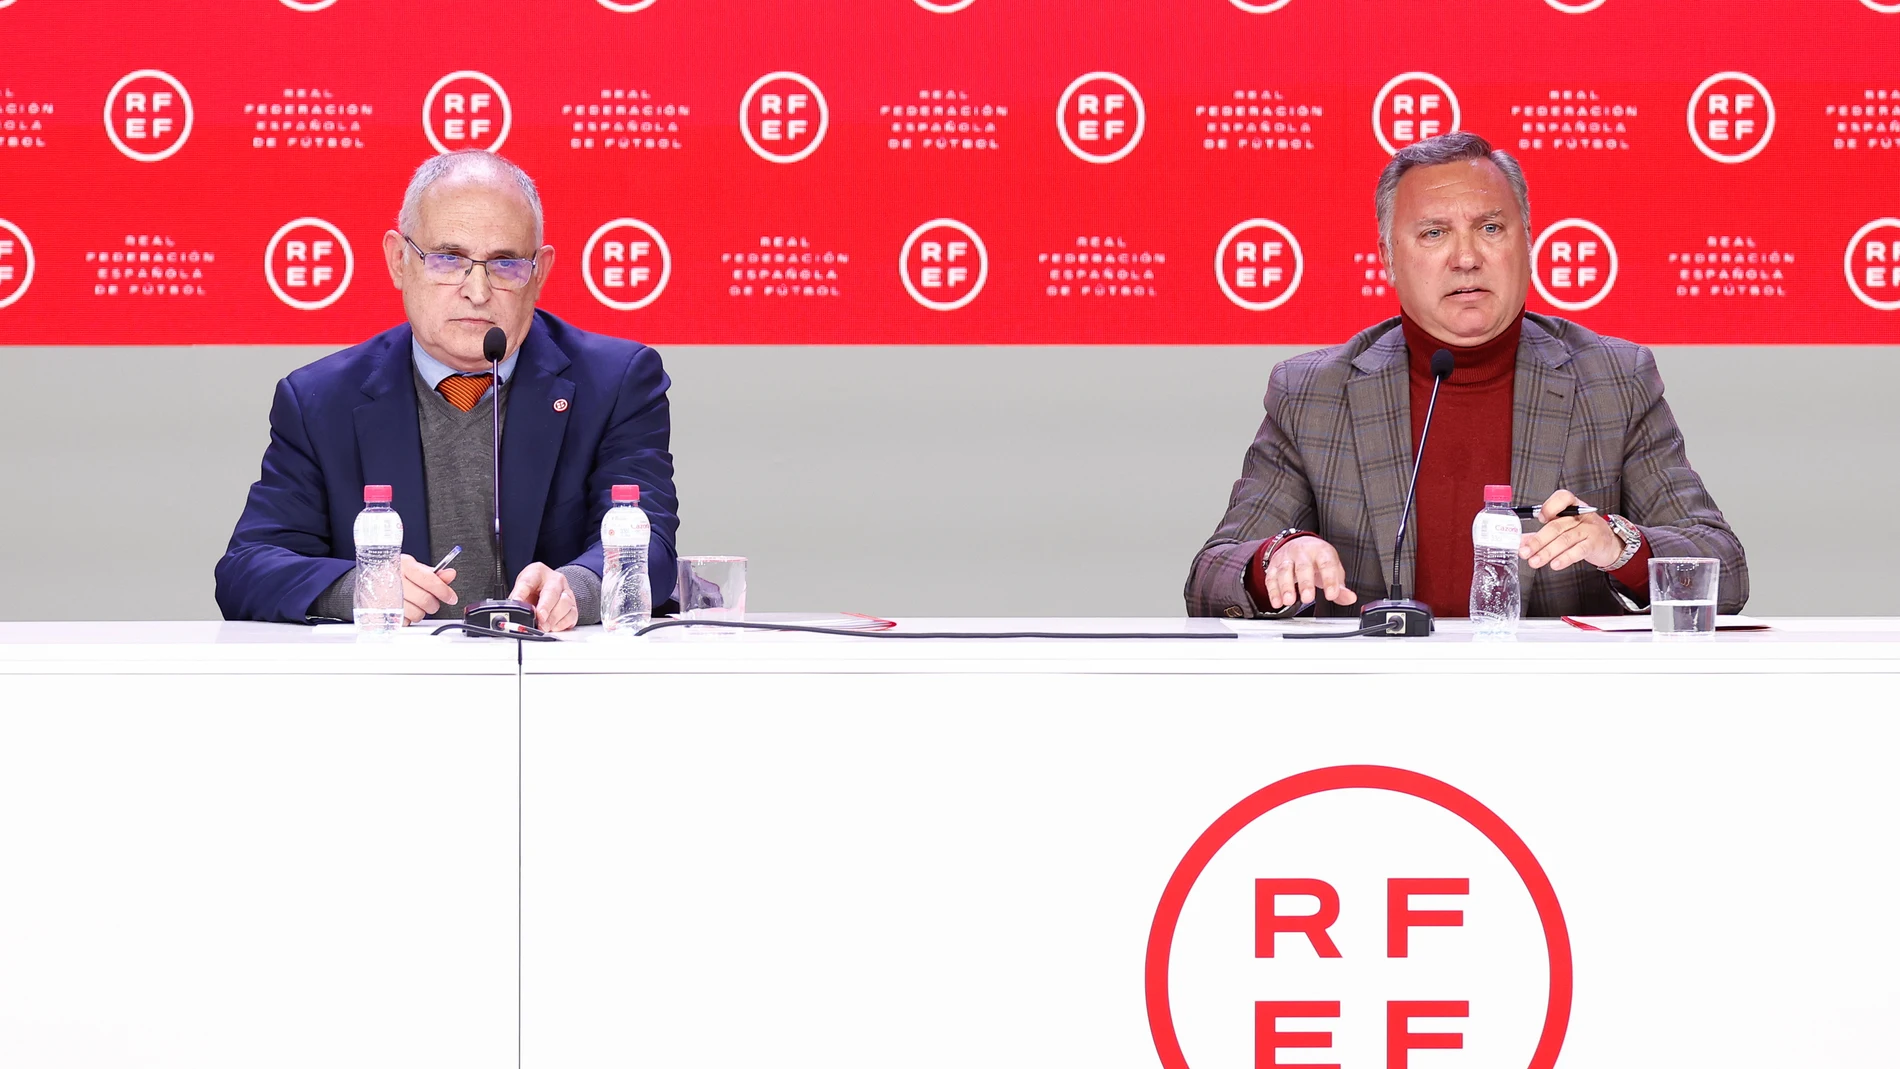 Luis Medina Cantalejo attends during the press conference of the Spanish Football Federation RFEF, offered by Andreu Camps, General Secretary of the RFEF, and Luis Medina Cantalejo, President of the Technical Committee of Referees of Spain, at Ciudad del Futbol on March 02, 2023, in Las Rozas, Madrid, Spain. AFP7 02/03/2023 ONLY FOR USE IN SPAIN